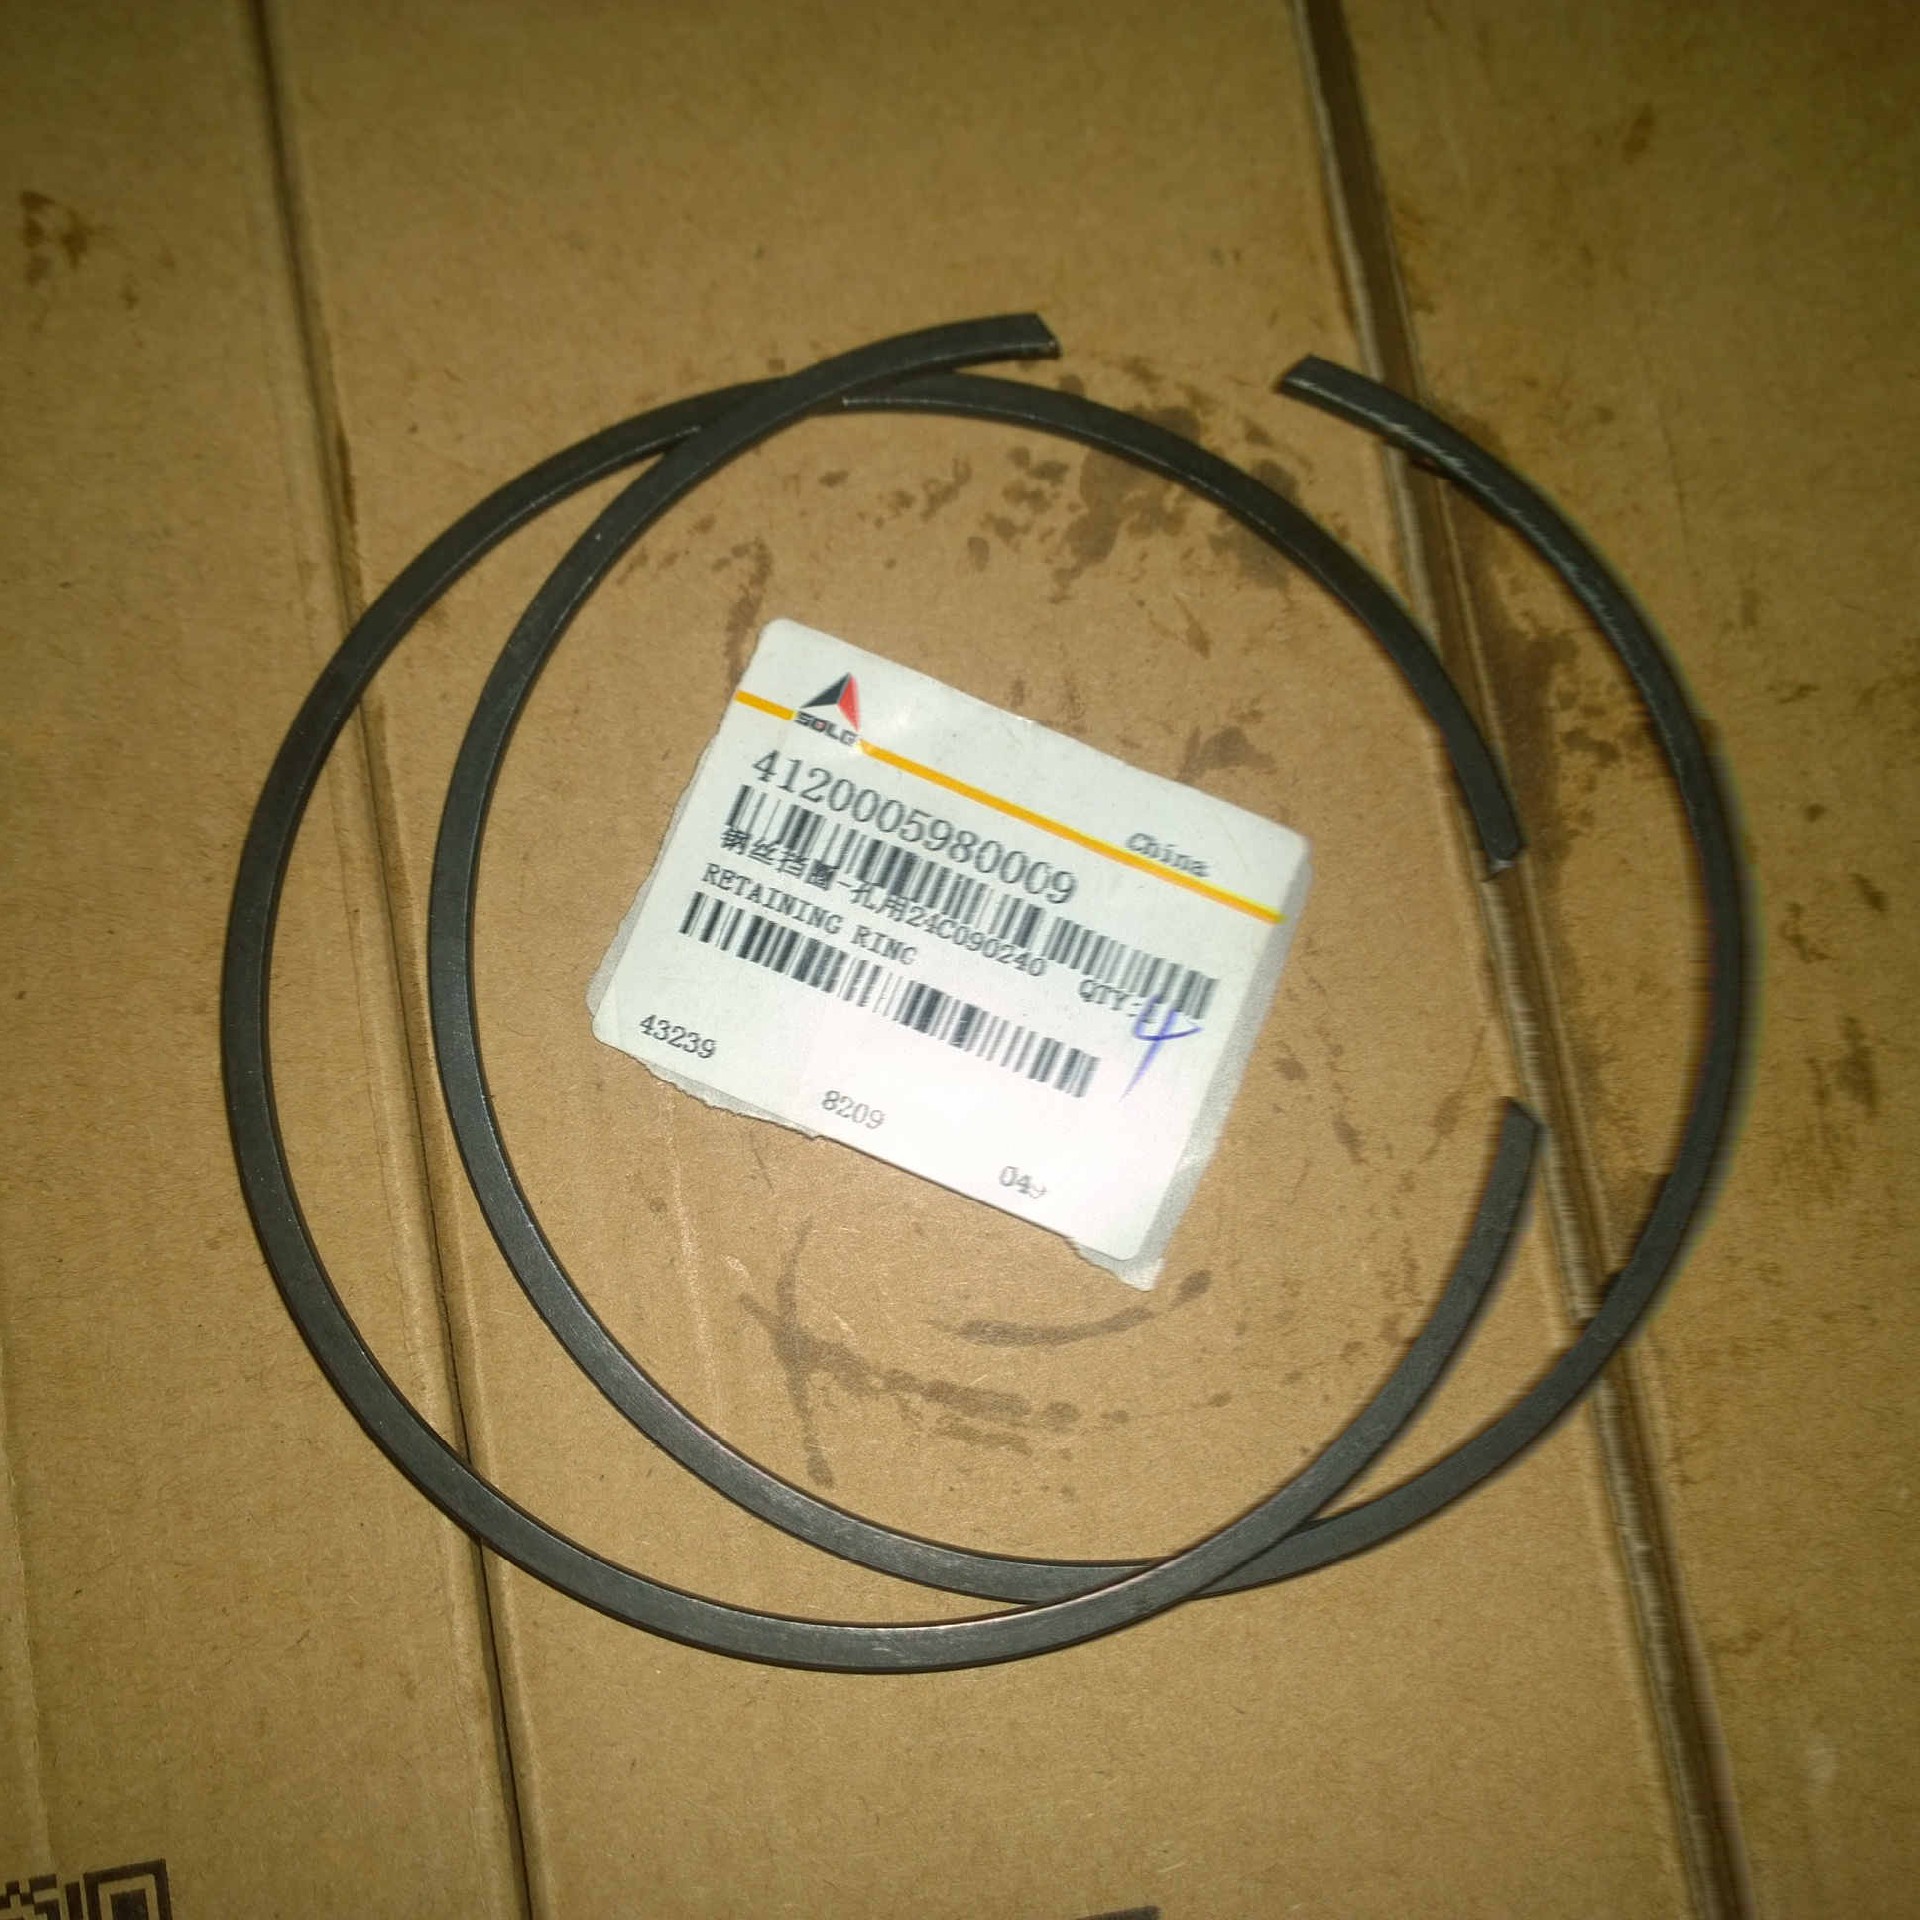 4120005980009 		Wire retaining ring